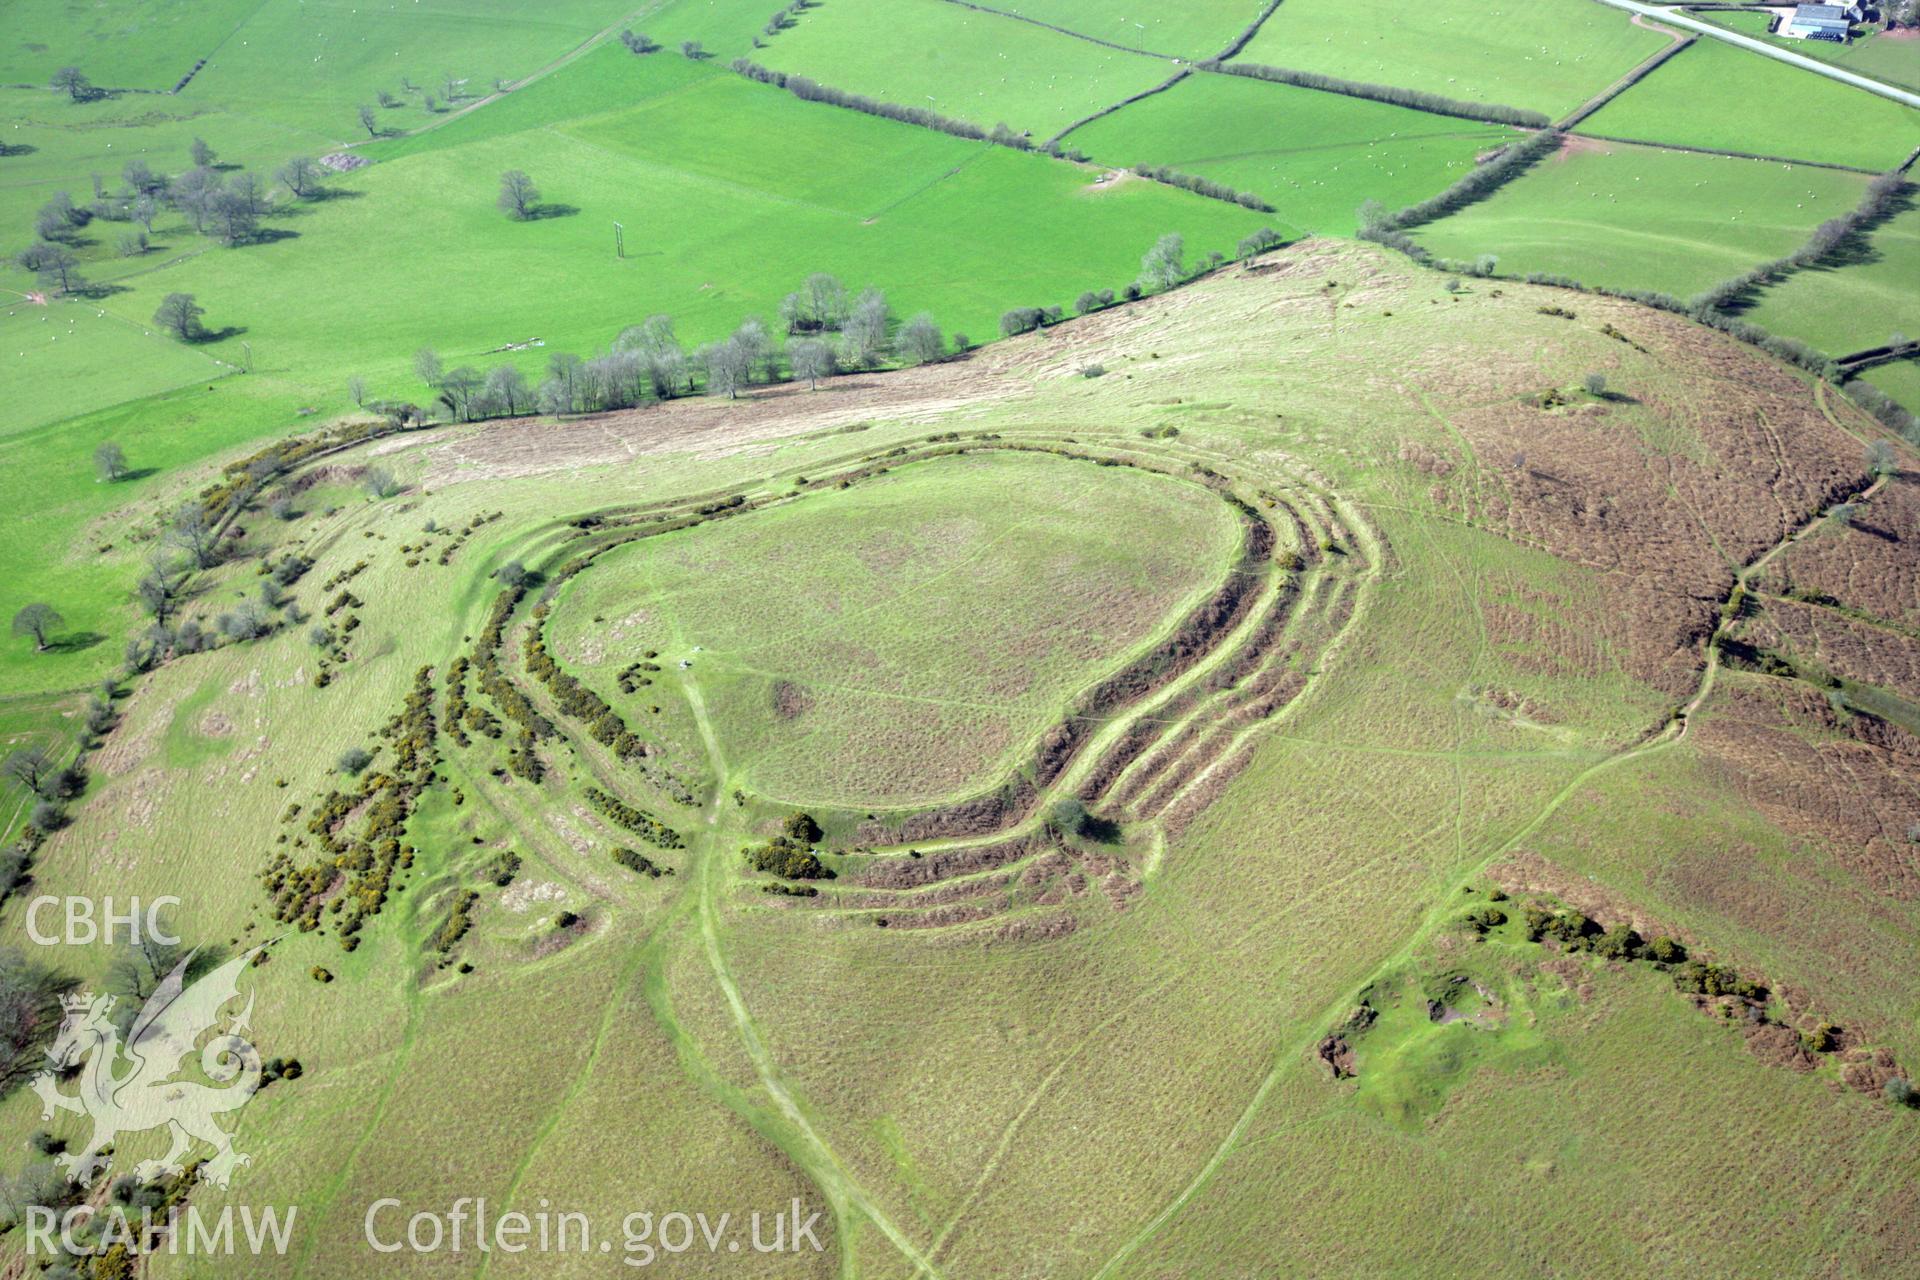 RCAHMW colour oblique photograph of Pen y Crug hillfort. Taken by Toby Driver and Oliver Davies on 28/03/2012.